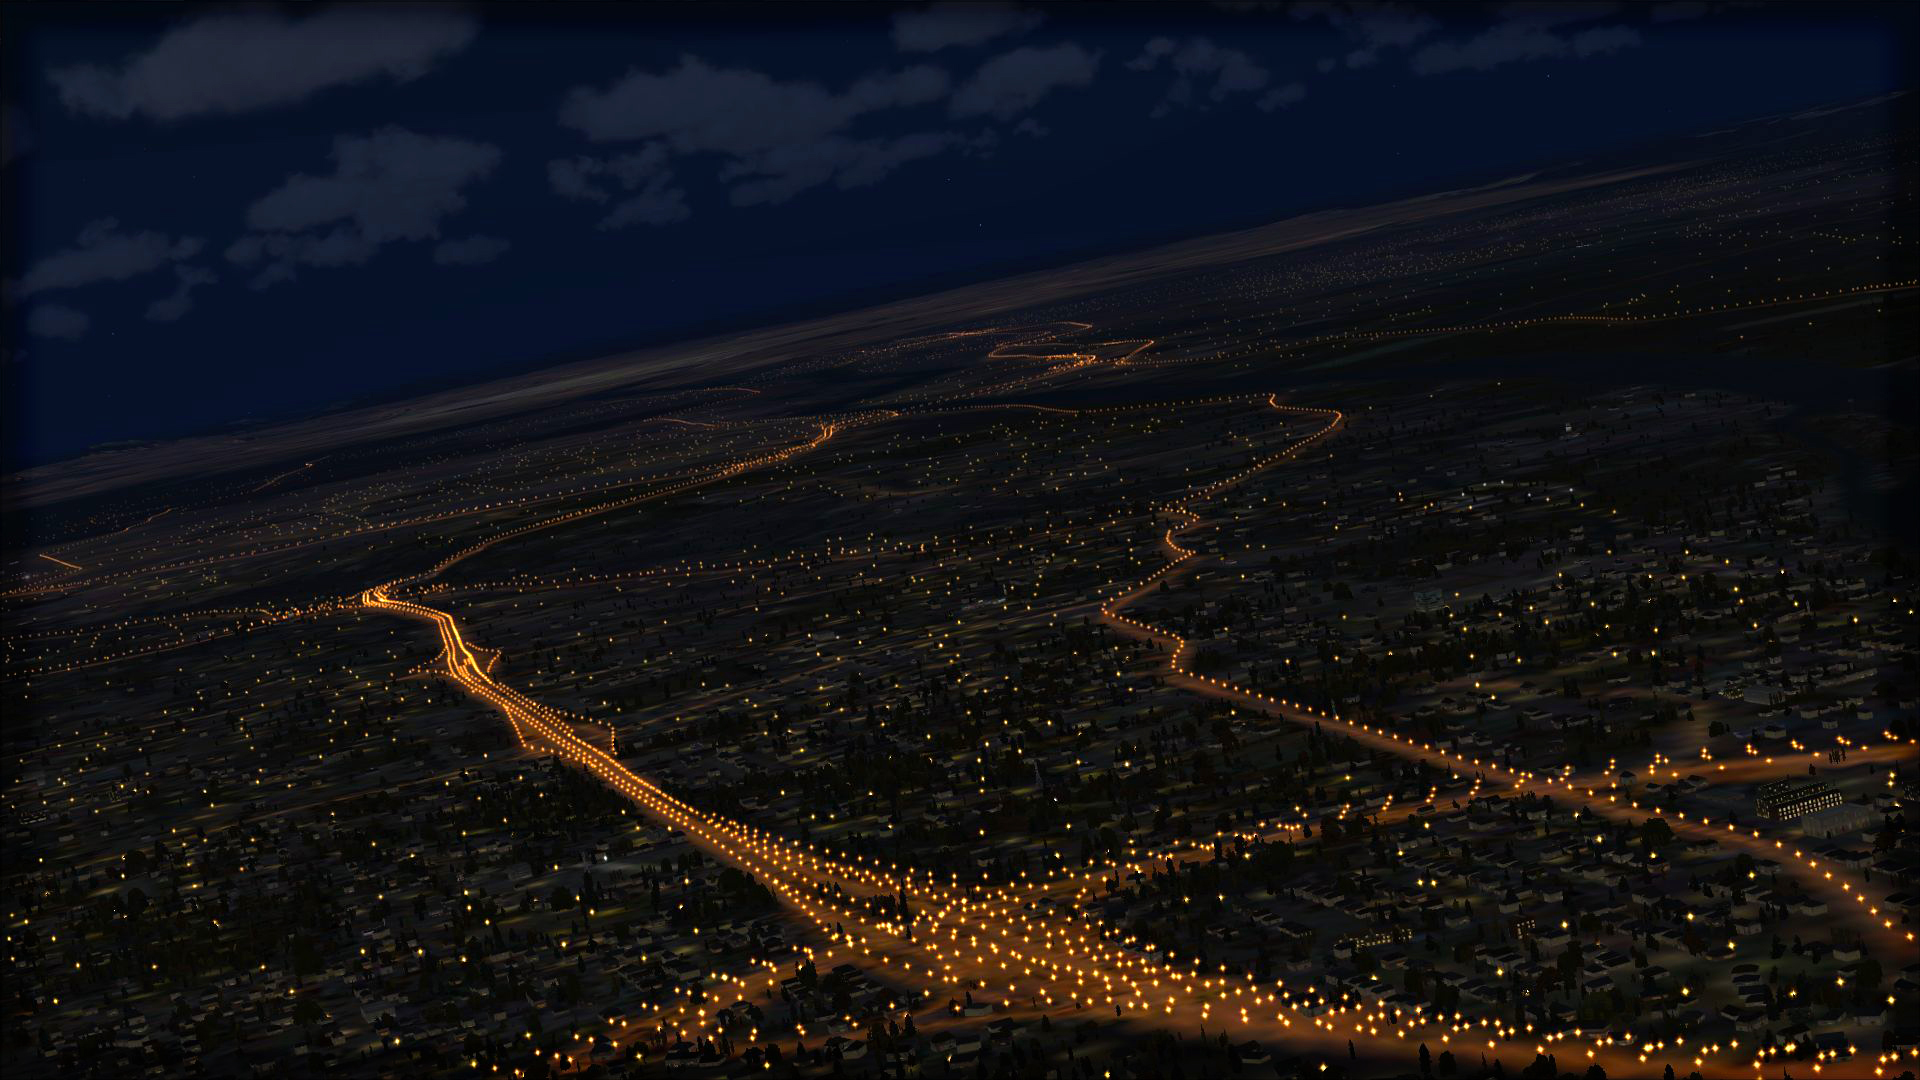 Save 50% on FSX Steam Edition: Night Environment: Spain Add-On on Steam